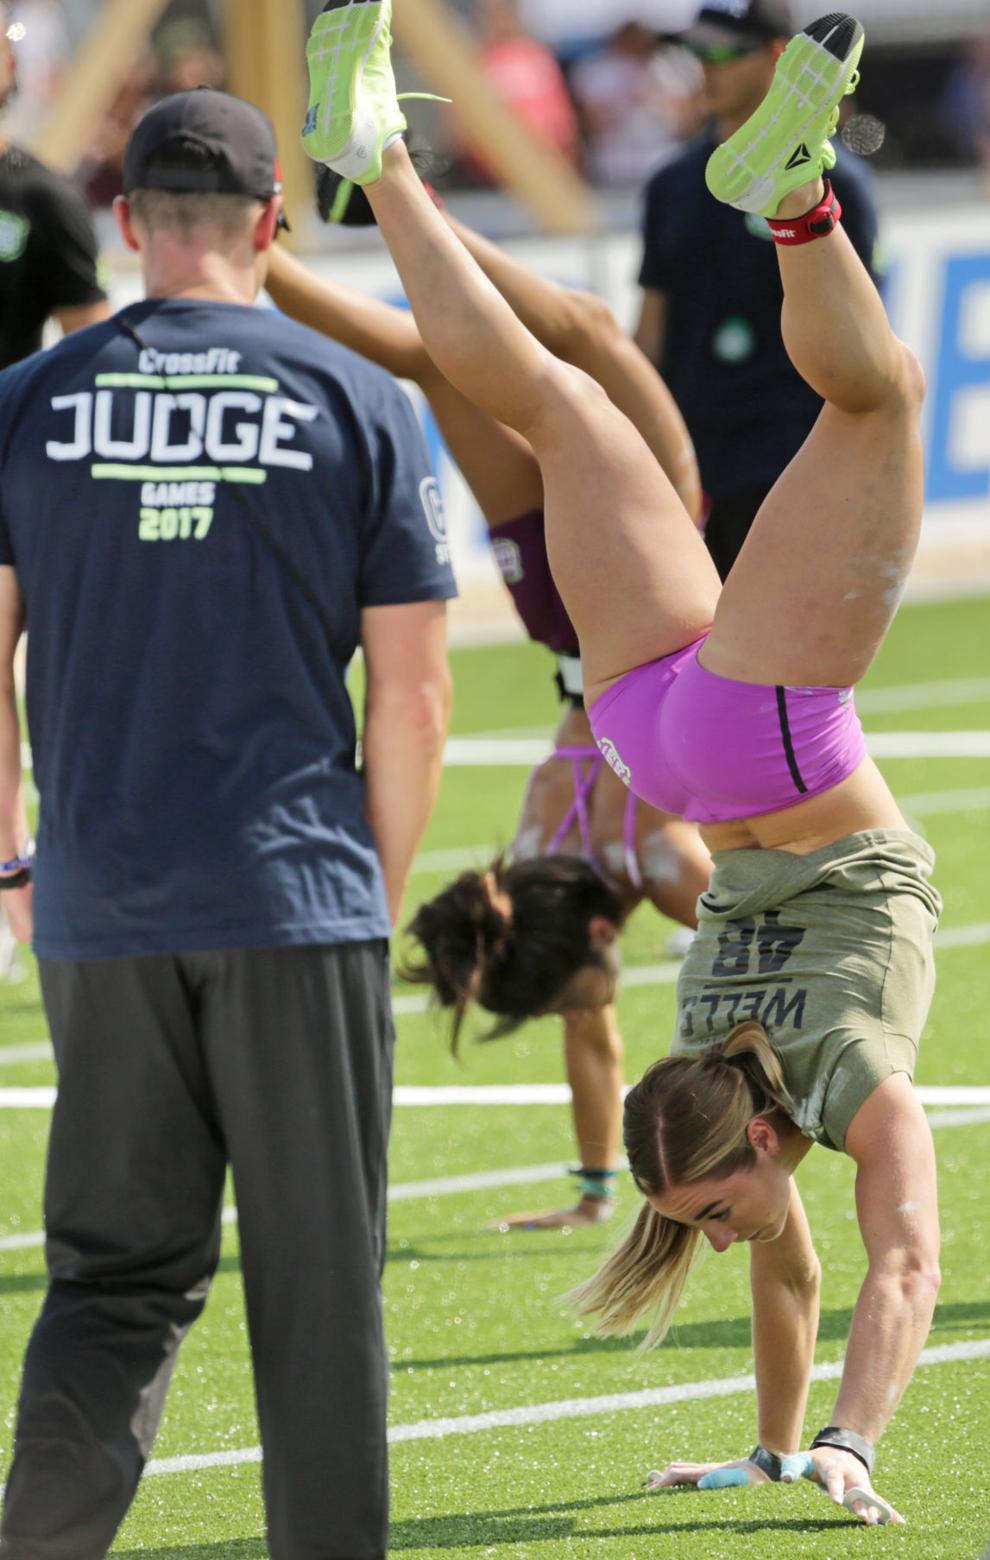 CrossFit Games return to Madison in August | Madison and ...